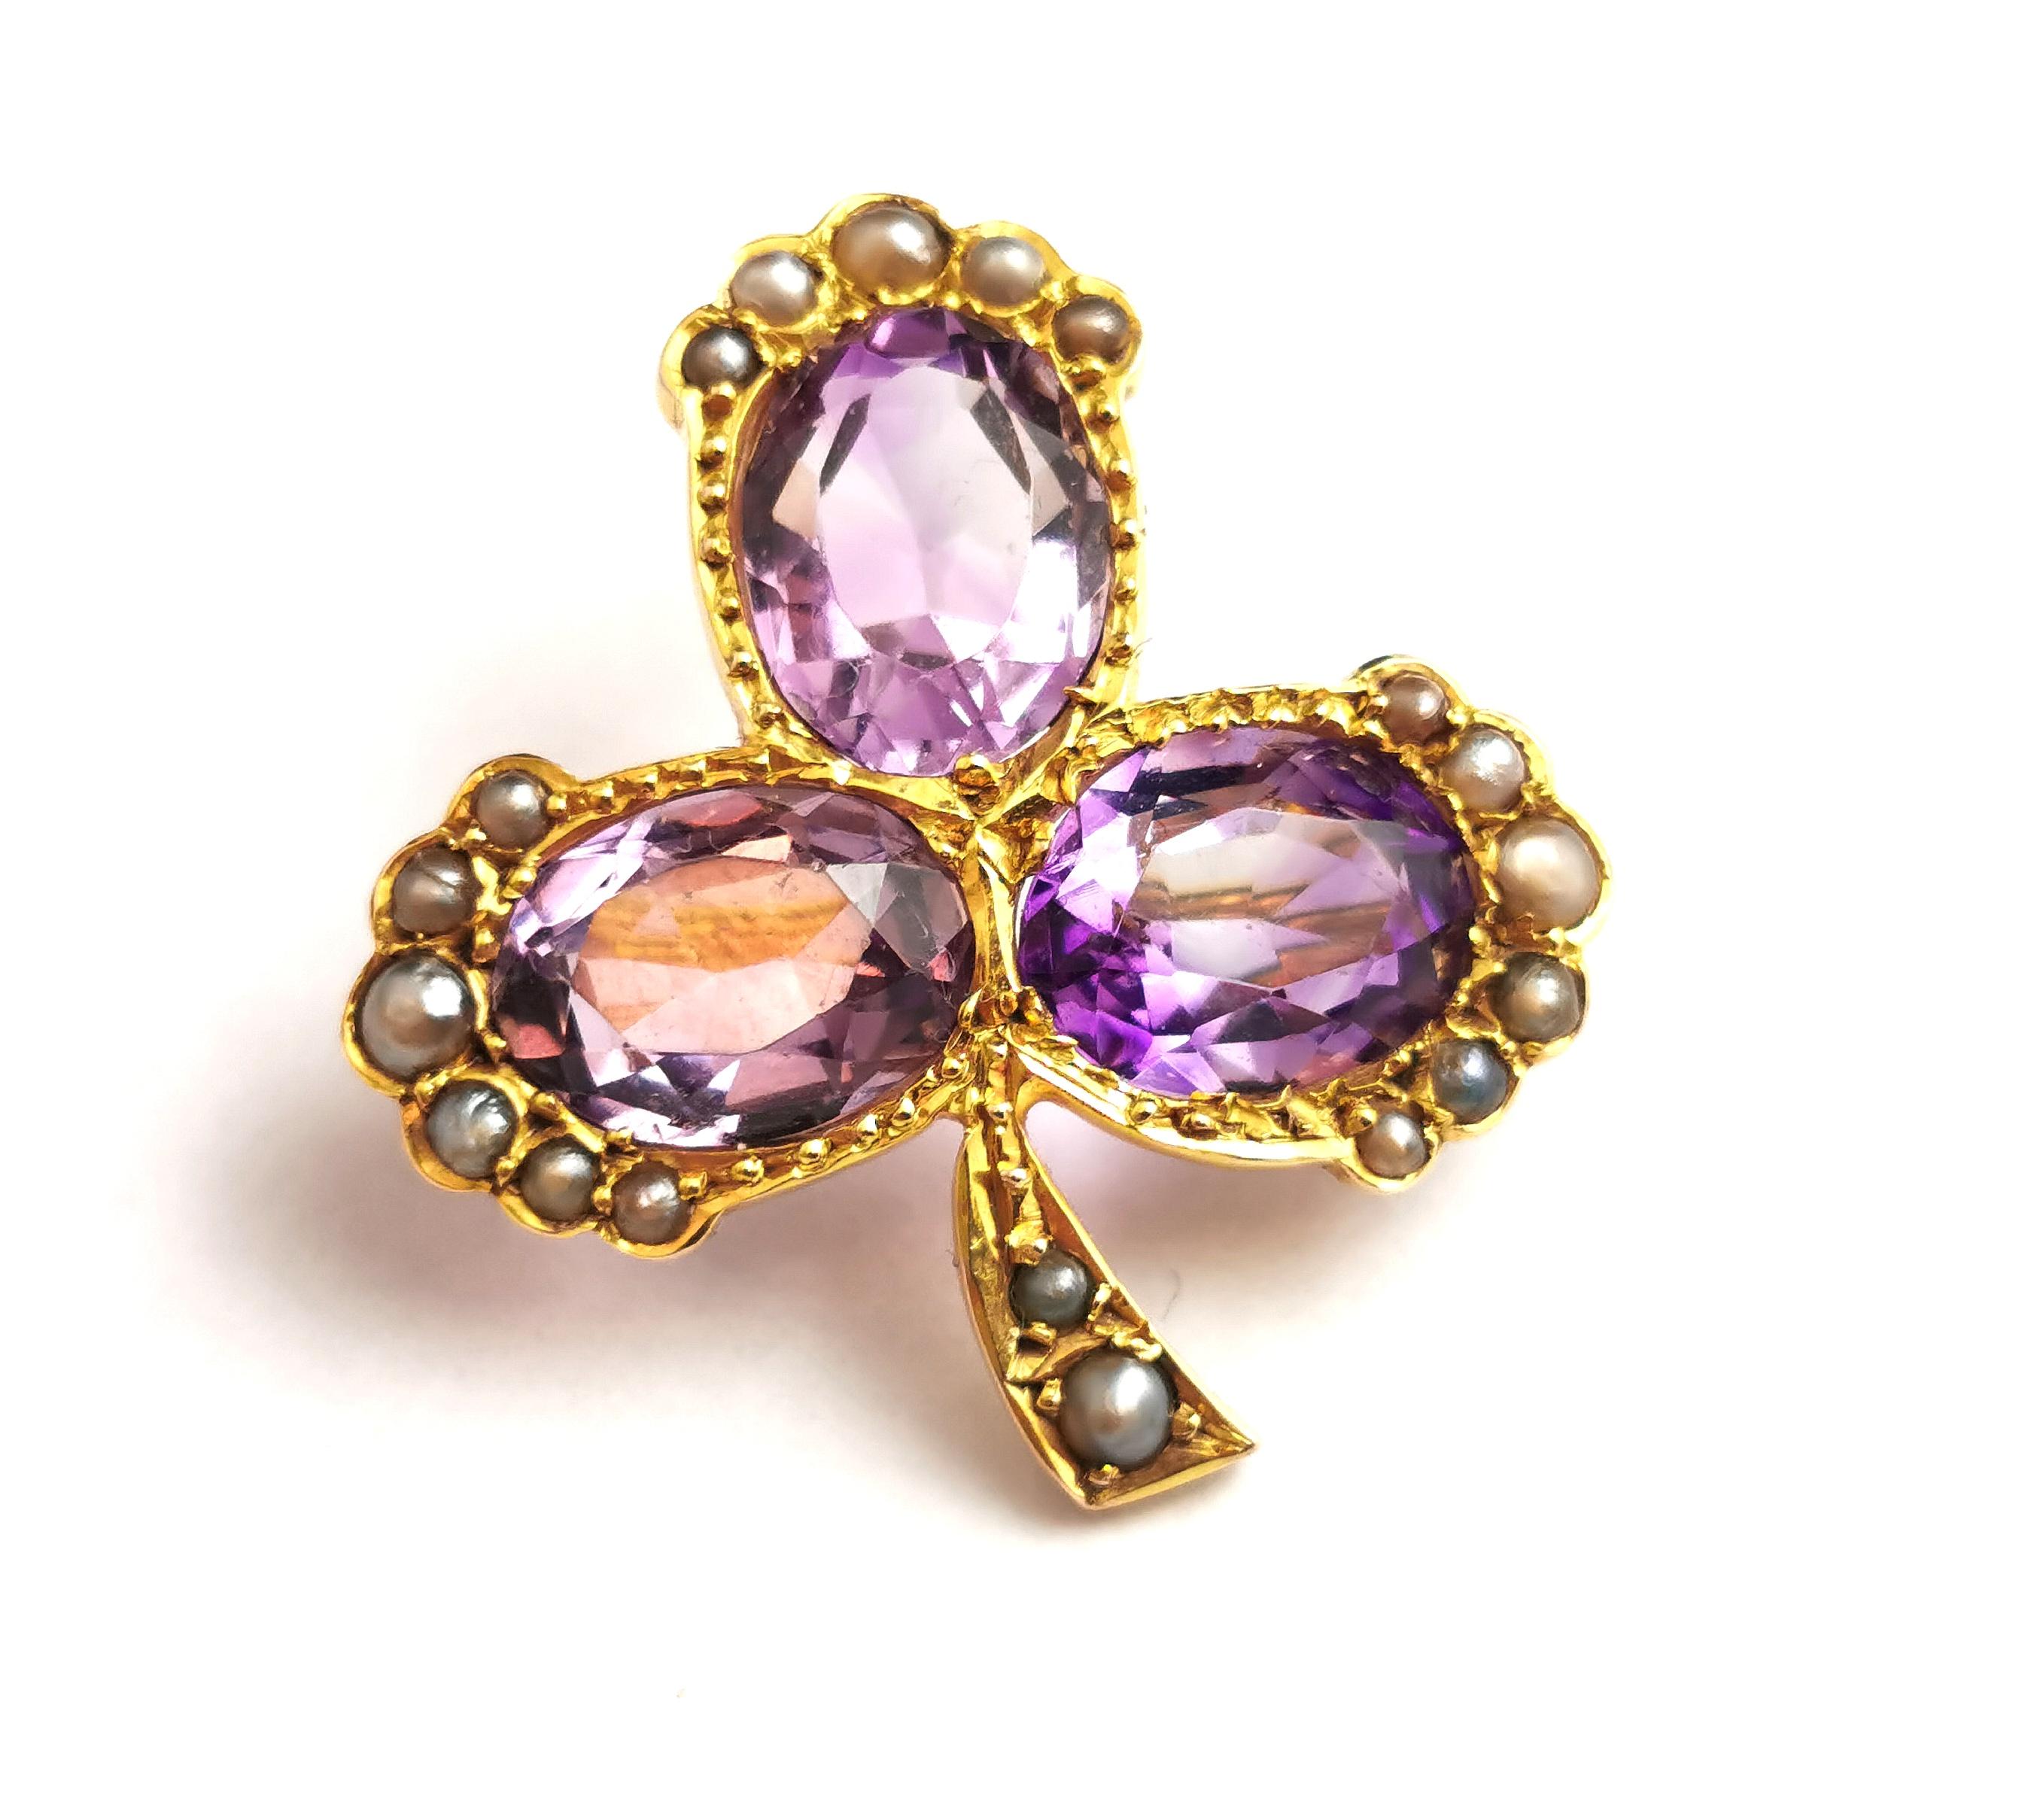 Antique Amethyst and Pearl Shamrock Brooch, Clover, 15k Gold, Victorian For Sale 4